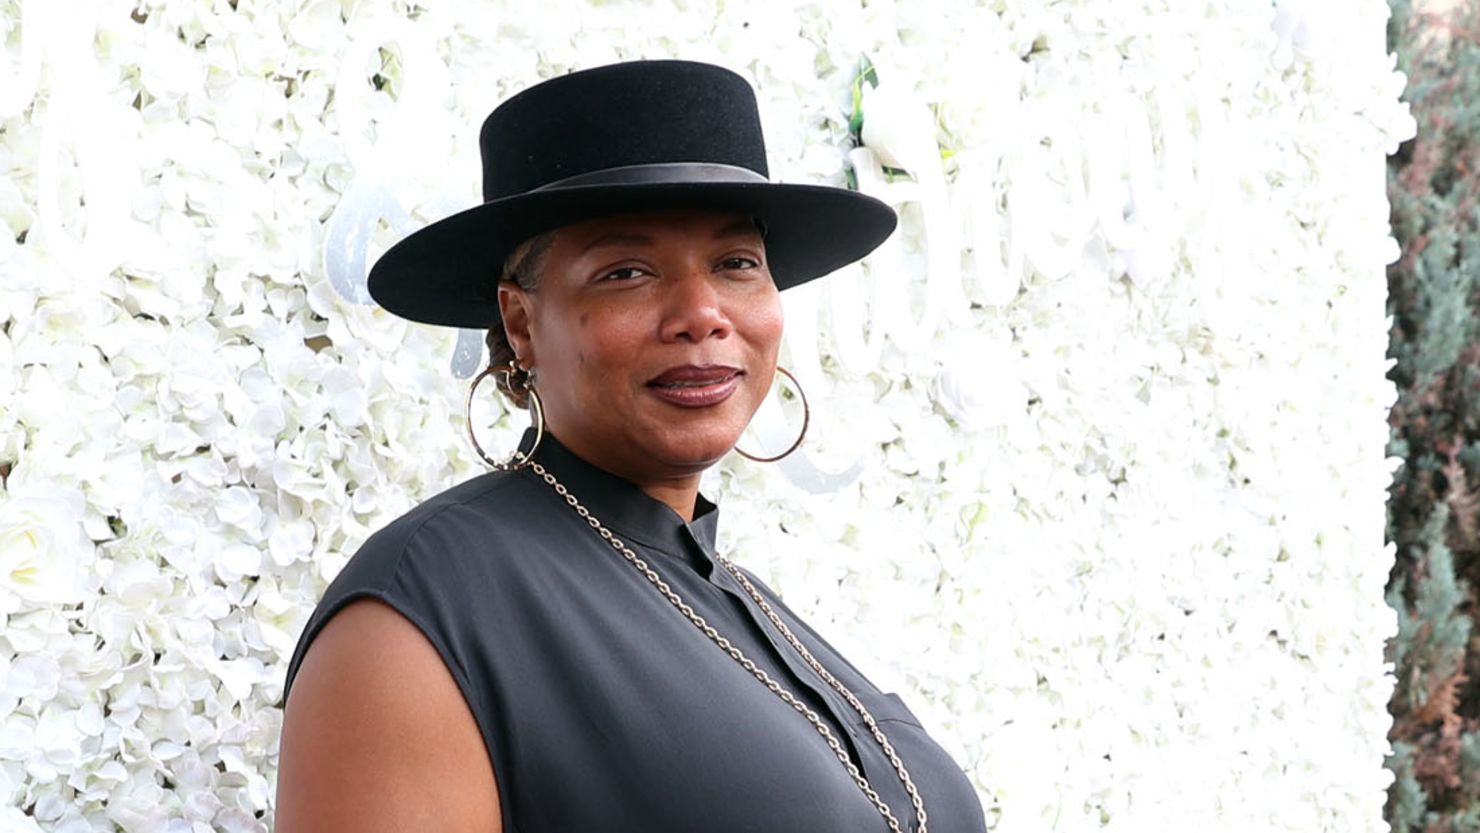 Queen Latifah attends the wedding of rapper Treach and Cicely Evans on September 8, 2019.